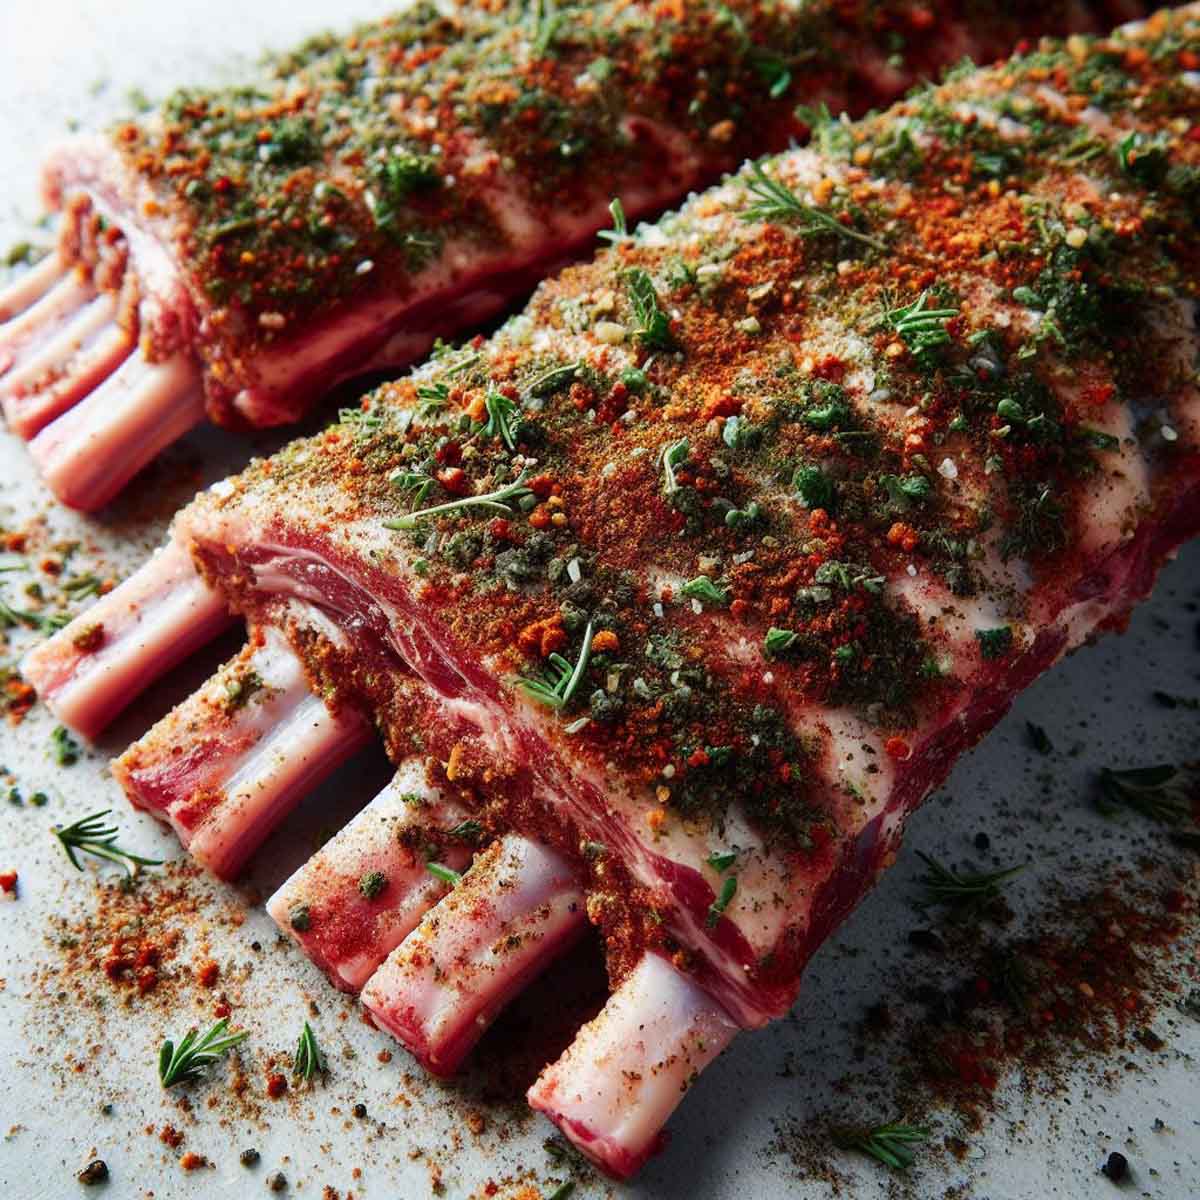 Lamb ribs generously seasoned with herbs and spices, ready for freezing, with vibrant and appetizing appearance.